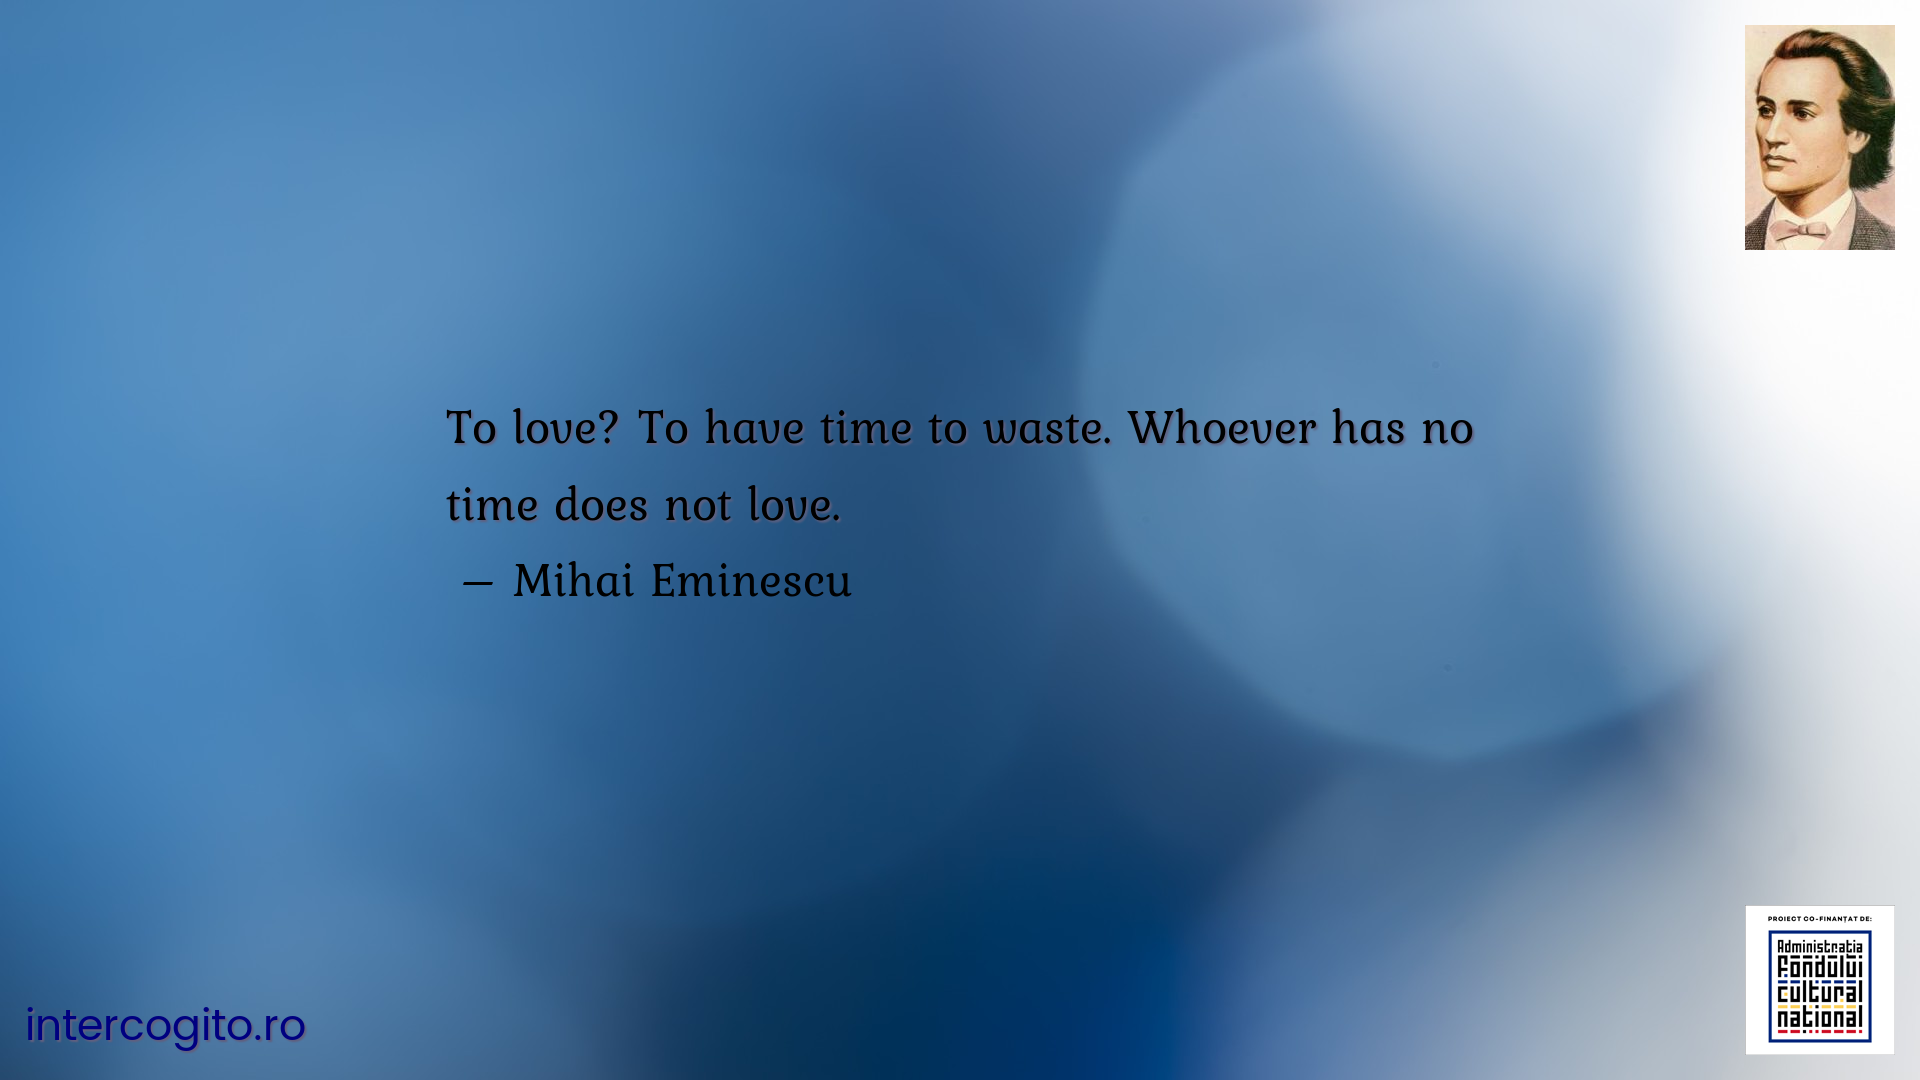 To love? To have time to waste. Whoever has no time does not love.